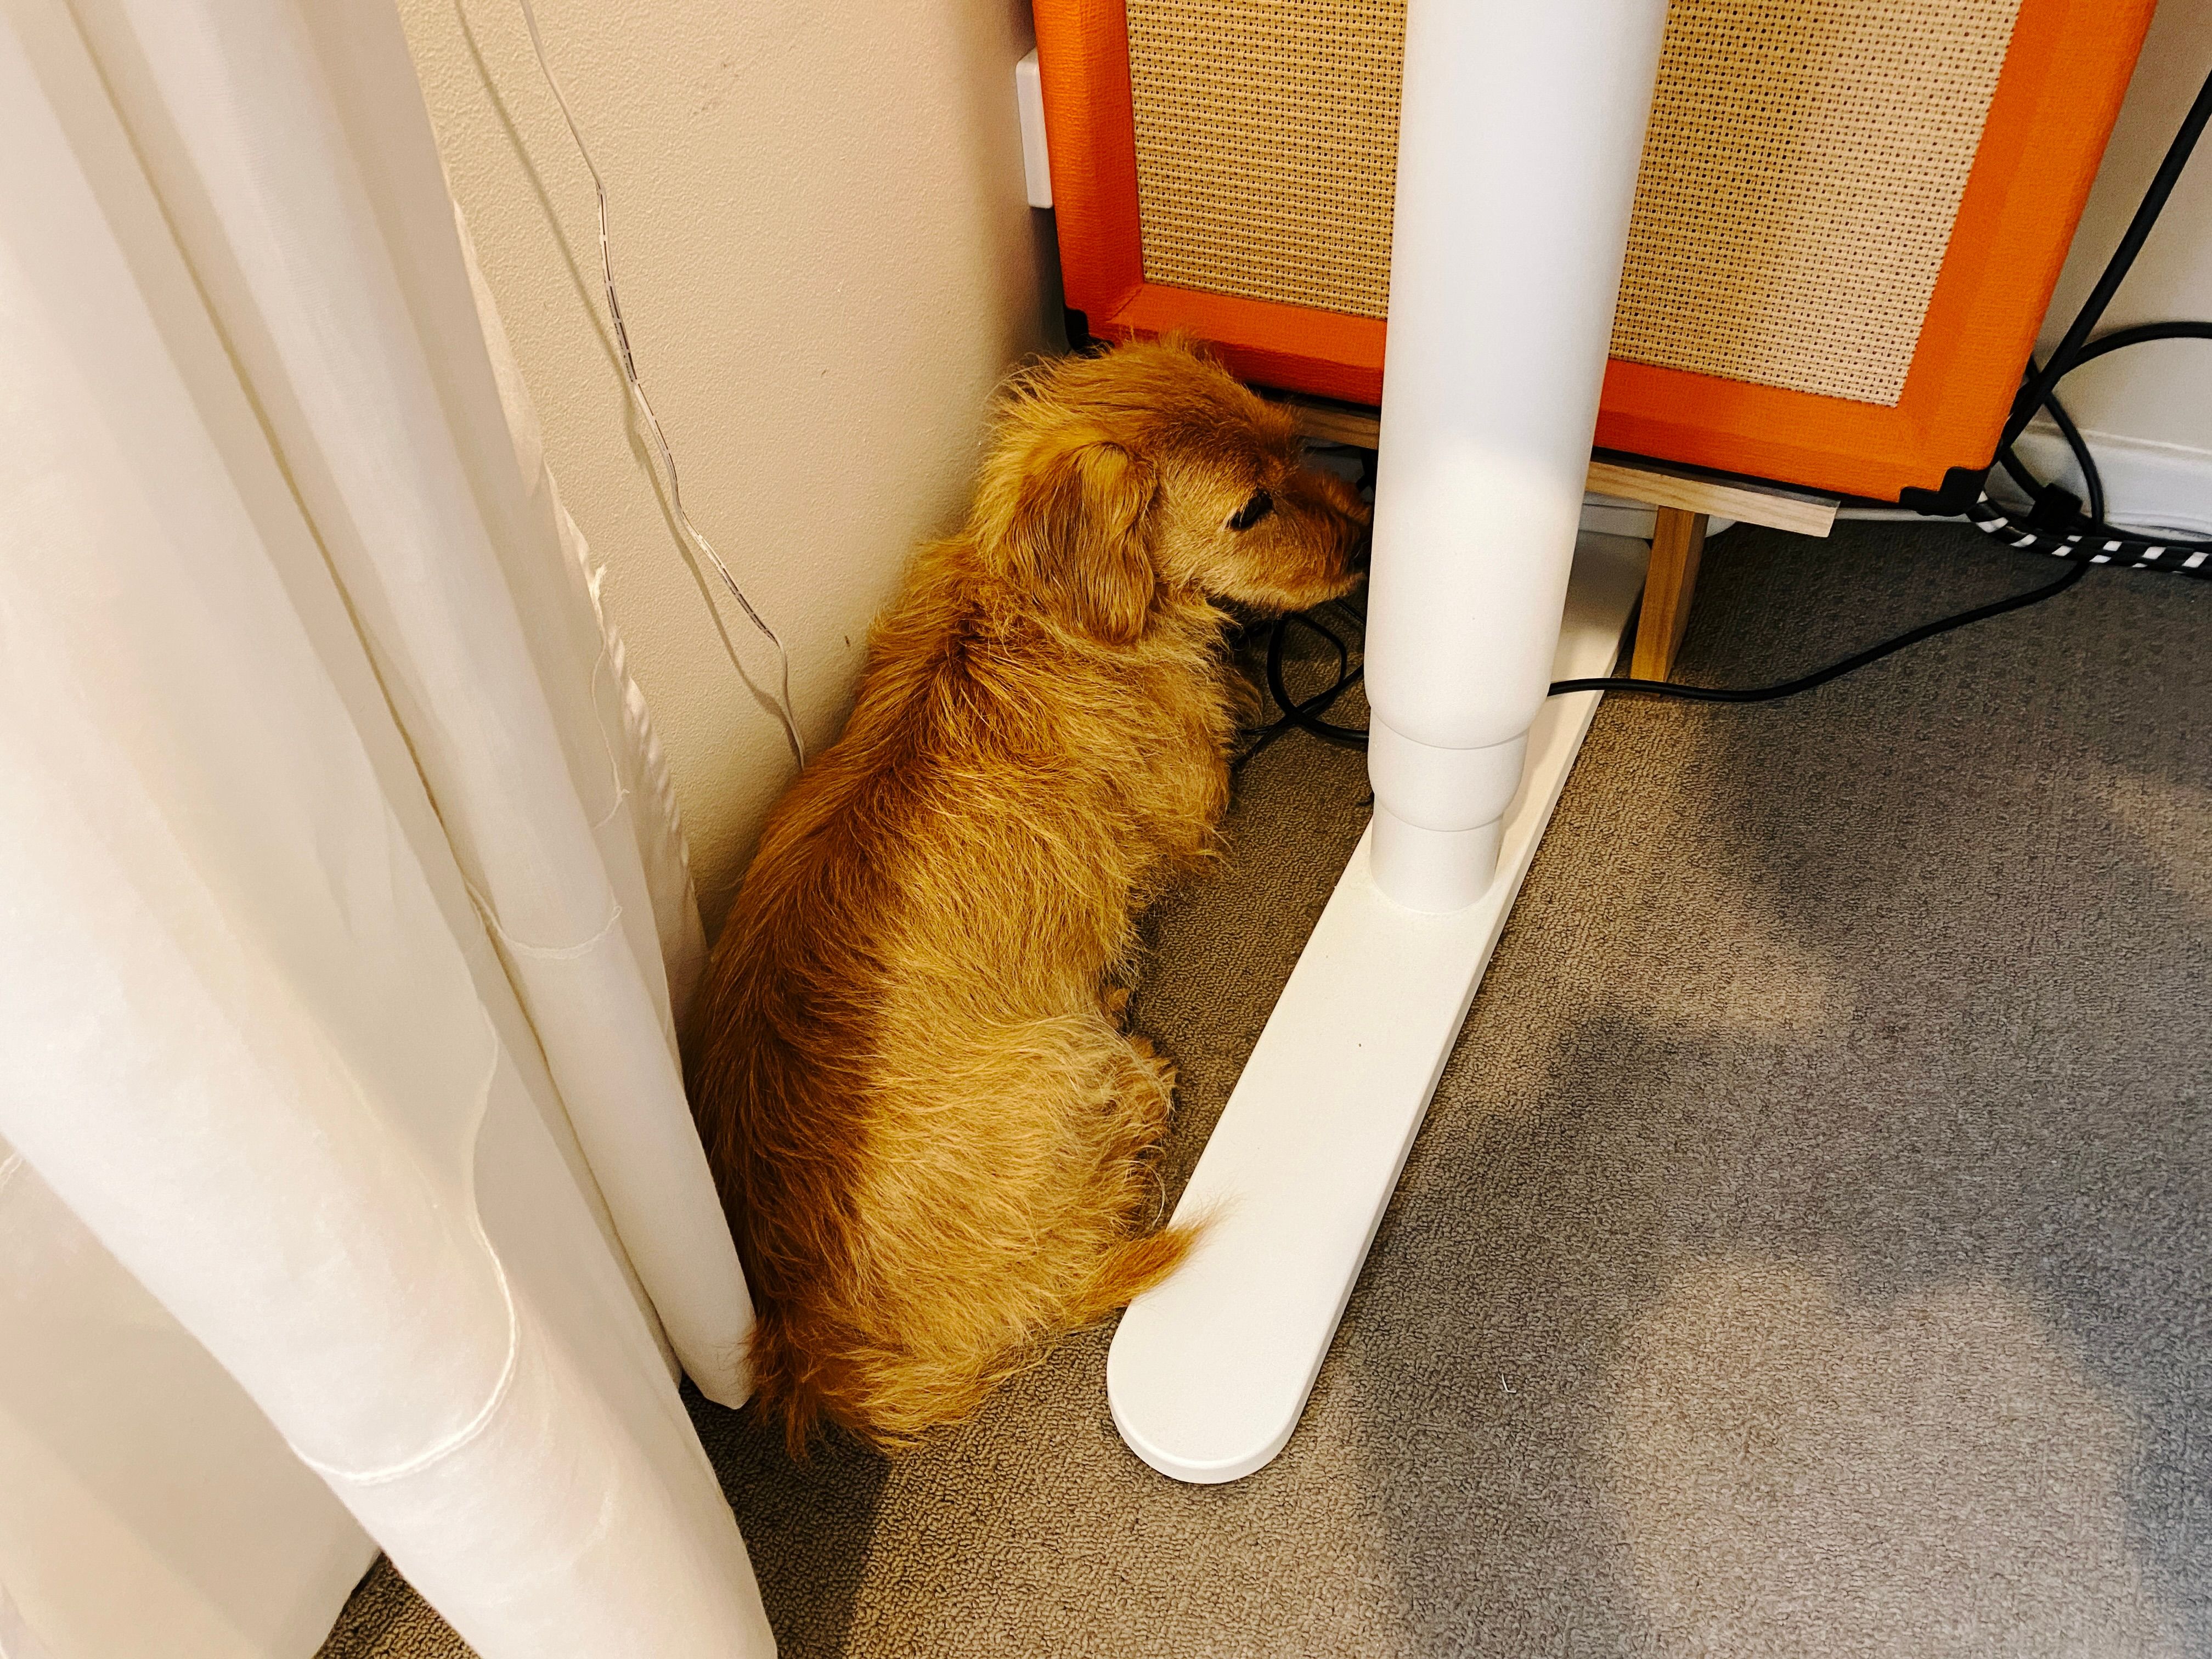 A photo of a small scruffy blonde dog lying on the floor in the gap between the wall and the leg of my standing desk.